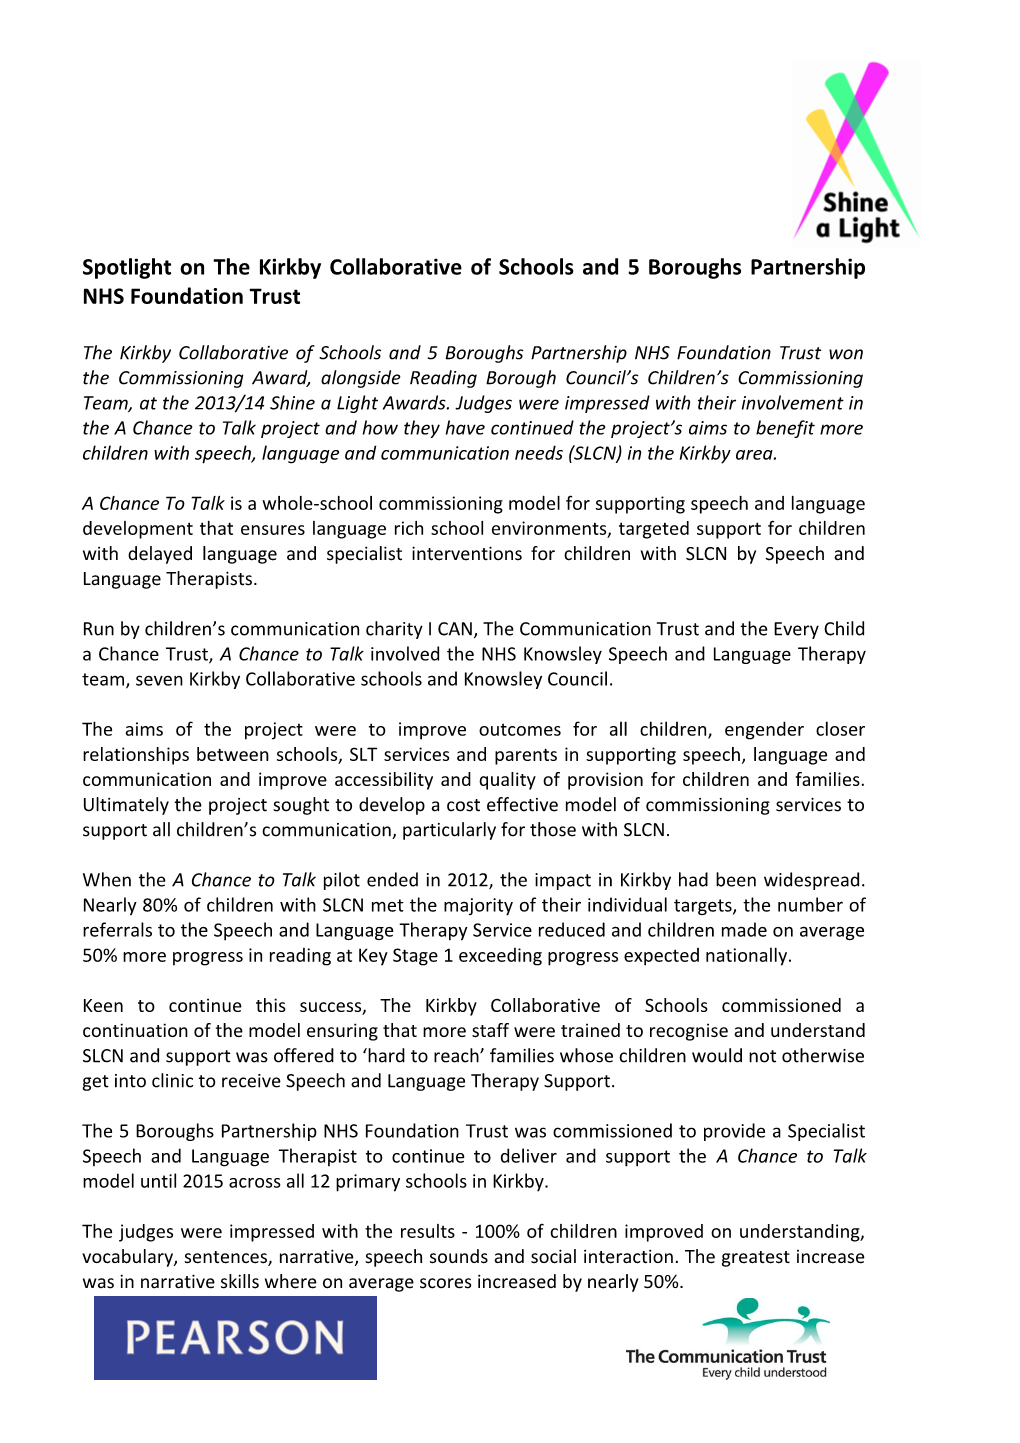 Spotlight on the Kirkby Collaborative of Schools and 5 Boroughs Partnership NHS Foundation